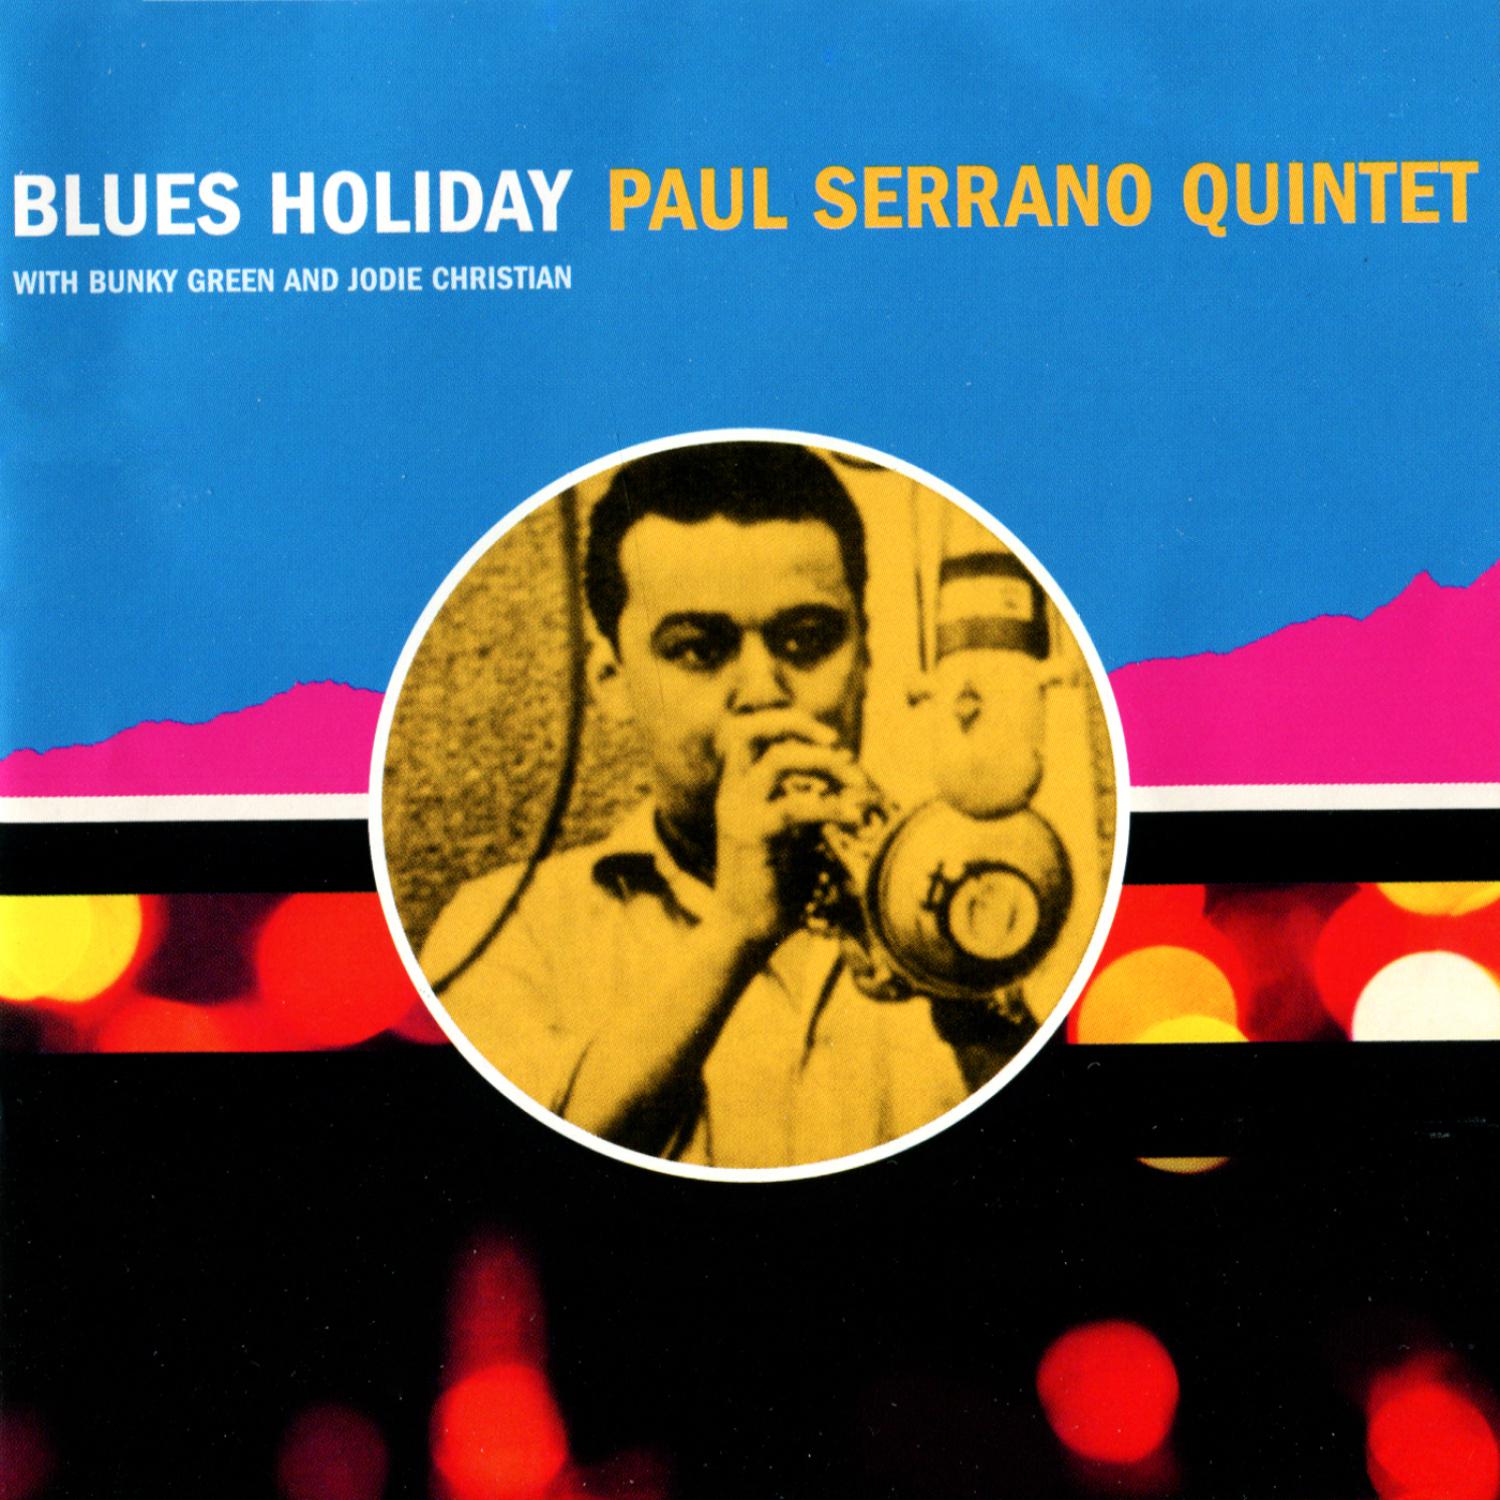 Paul Serrano Quintet - Everything's Coming Up Roses (Blues Holiday)